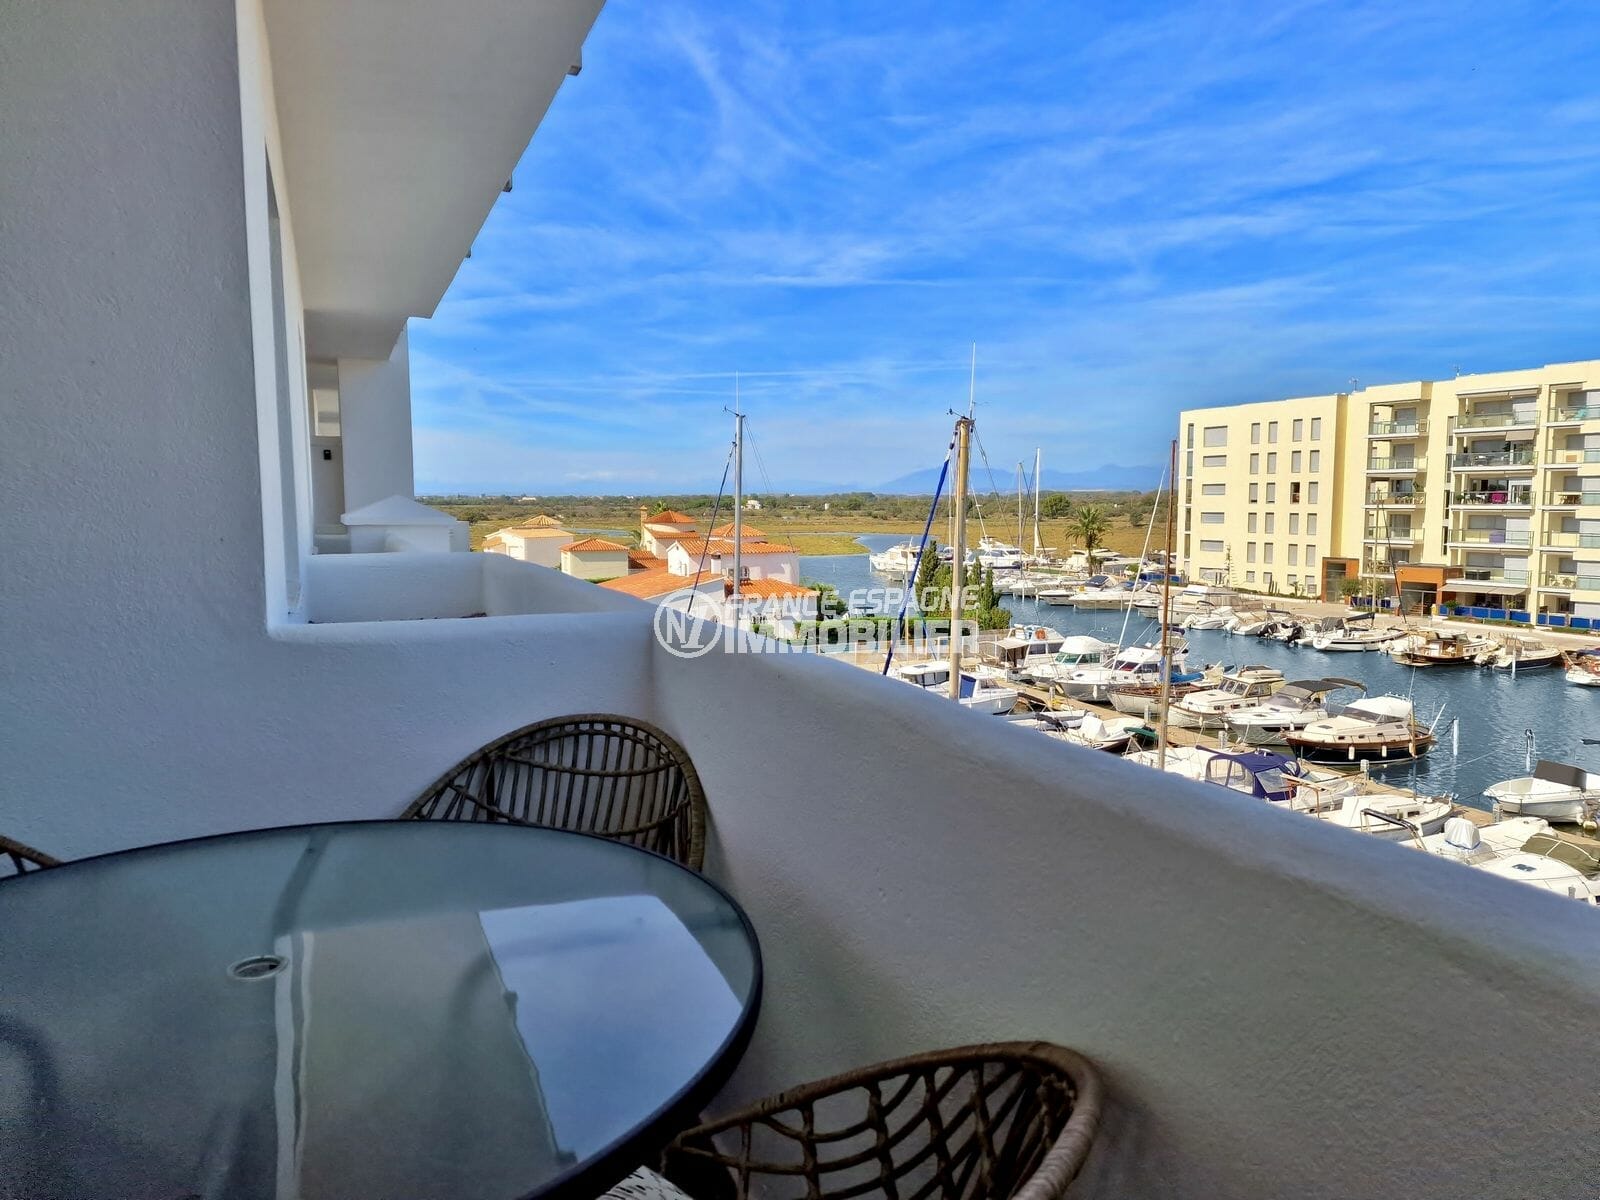 Exclusive roses - apartment marina view, mooring possible